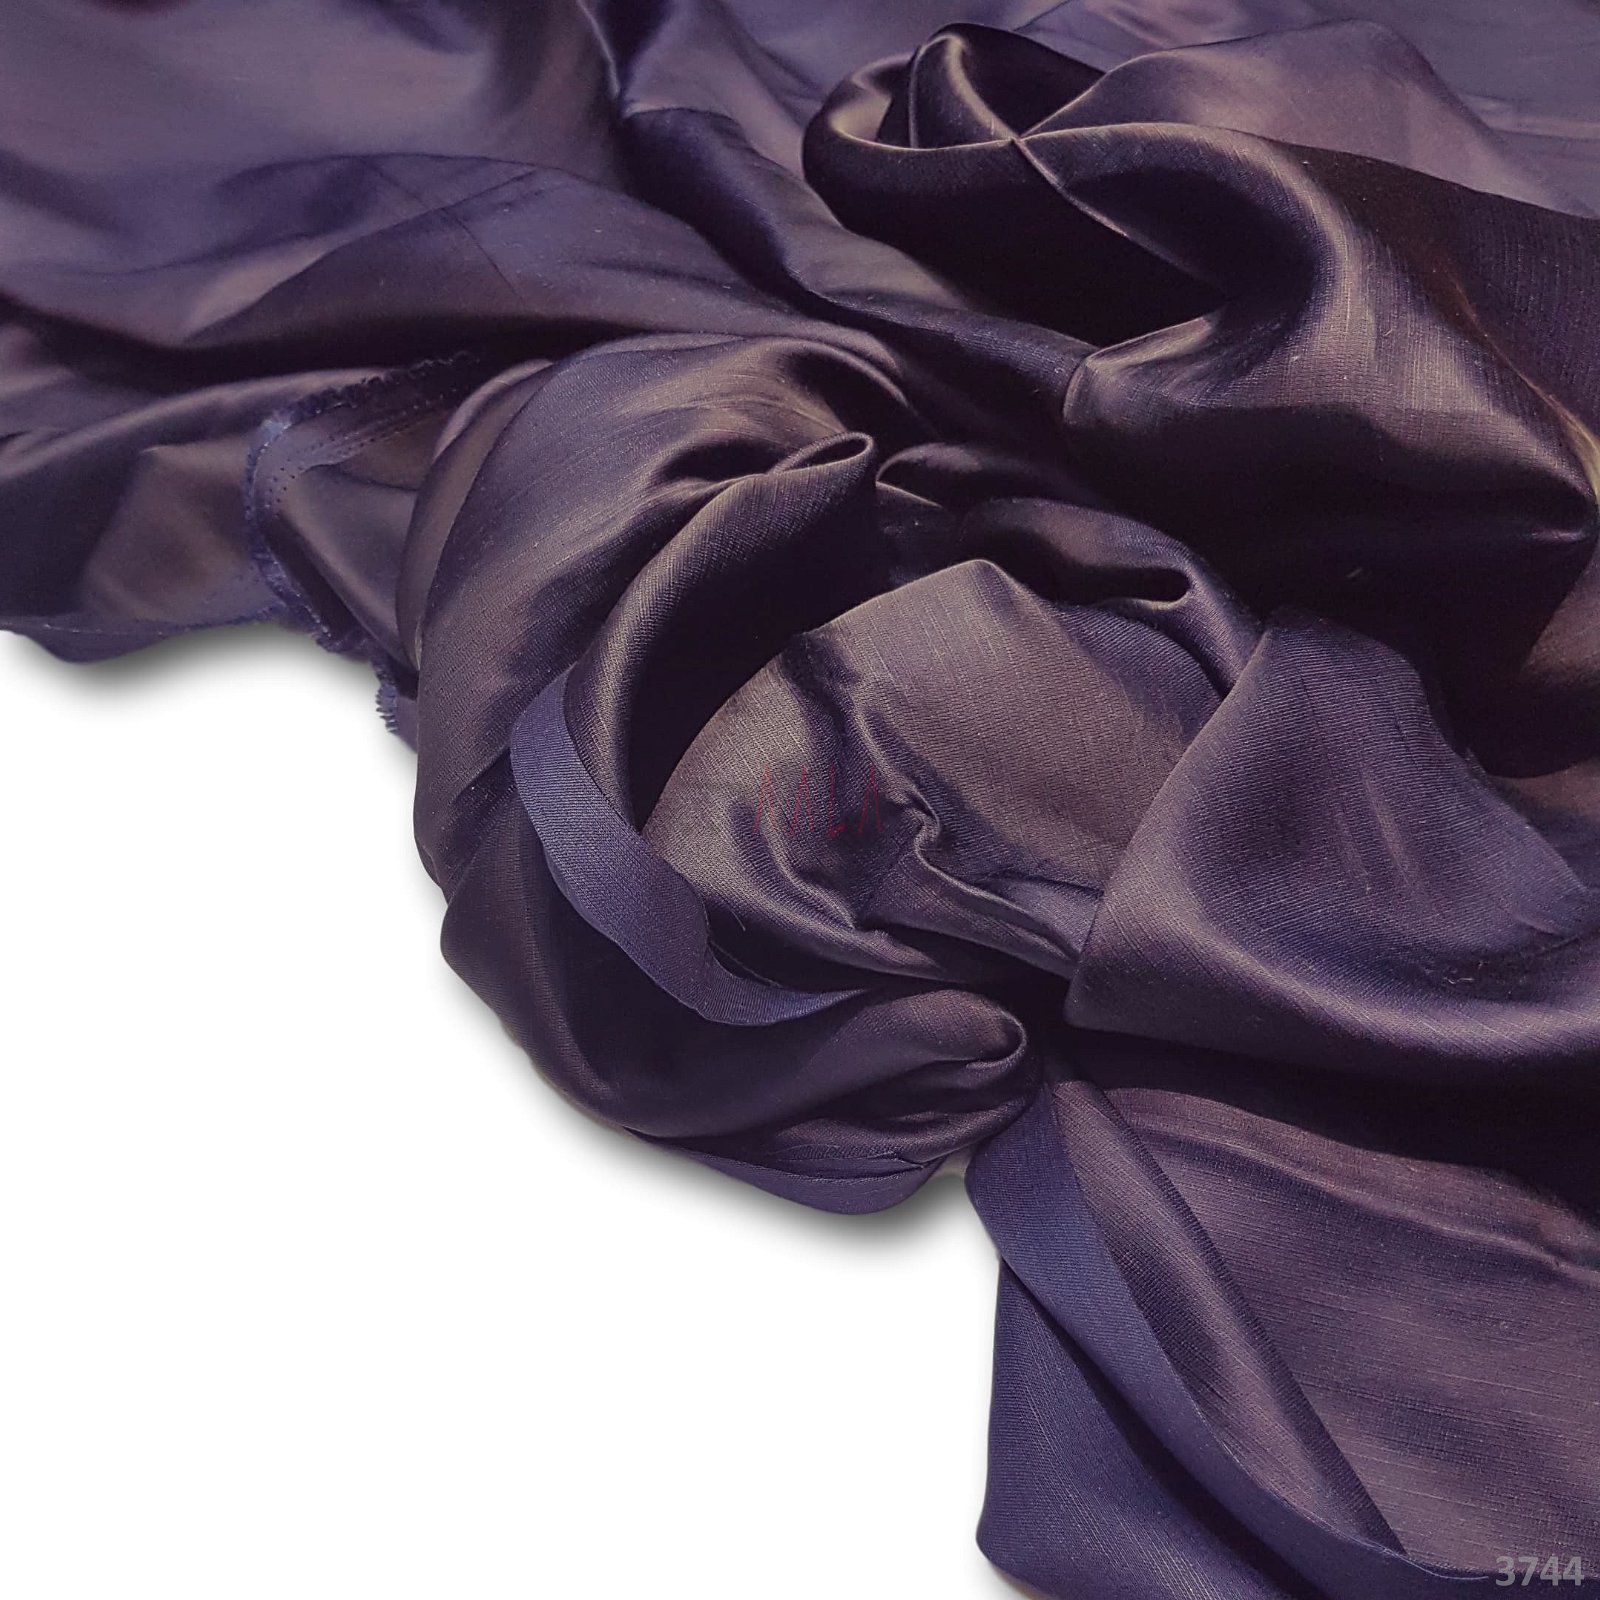 Linen Satin Viscose 44 Inches Dyed Per Metre #3744